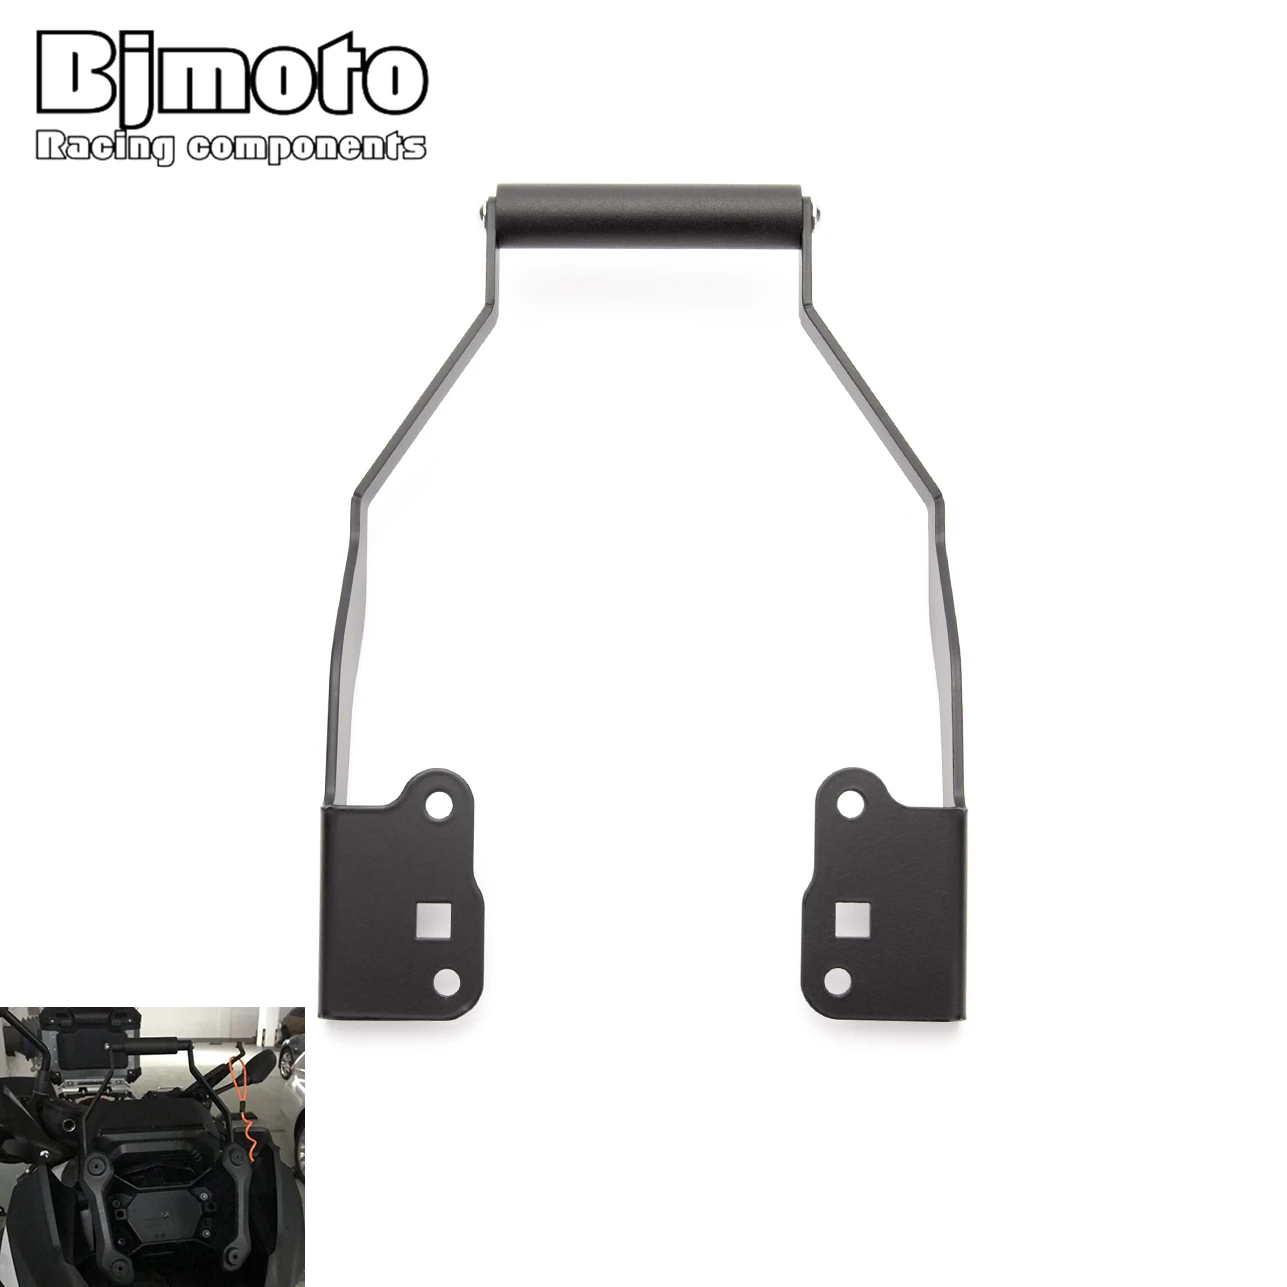 

BJMOTO For BMW F750GS F850GS 2018 2019 Motorcycle GPS Bar Mobile Phone bracket GPS front Stand Holder Smartphone F 750/850 GS